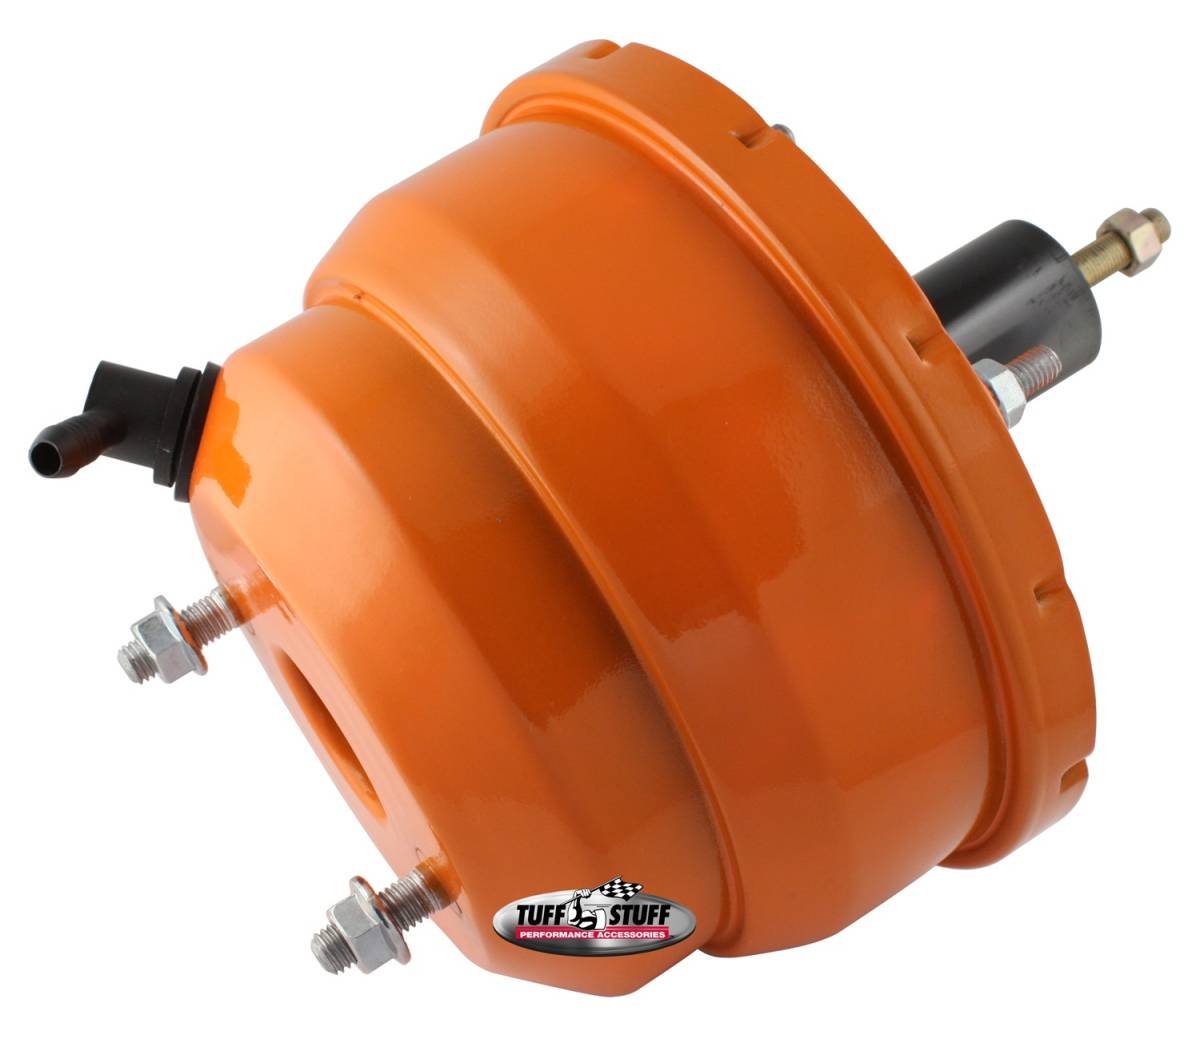 Tuff Stuff Performance - Power Brake Booster Univ. 8 in. Dual Diaphragm Incl. 3/8 in.-16 Mtg. Studs And Nuts Fits Hot Rods/Customs/Muscle Cars Orange Powdercoat 2223NCORANGE